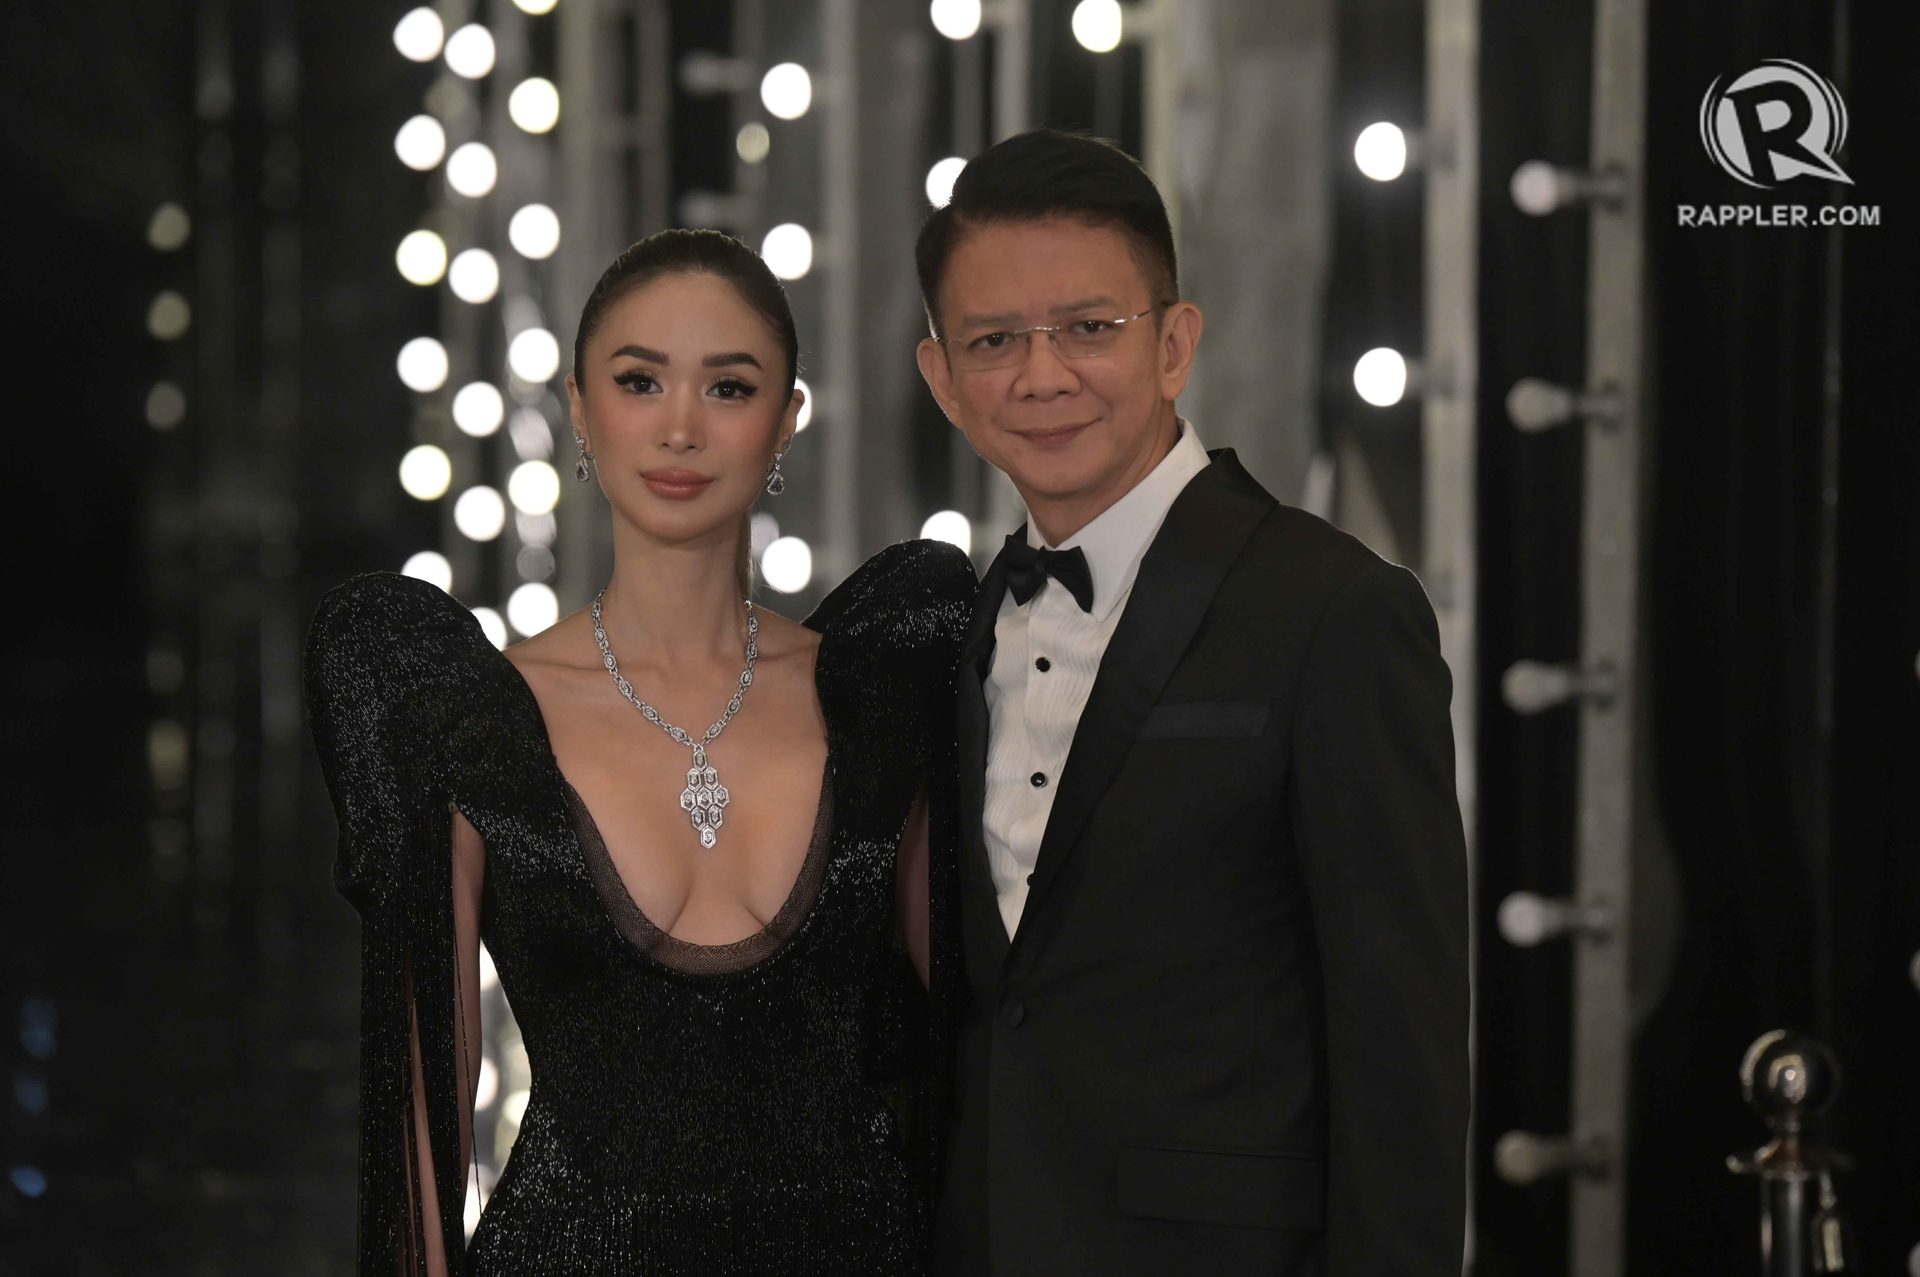 ‘See you soon’: Heart Evangelista teases reunion with Chiz Escudero amid breakup rumors